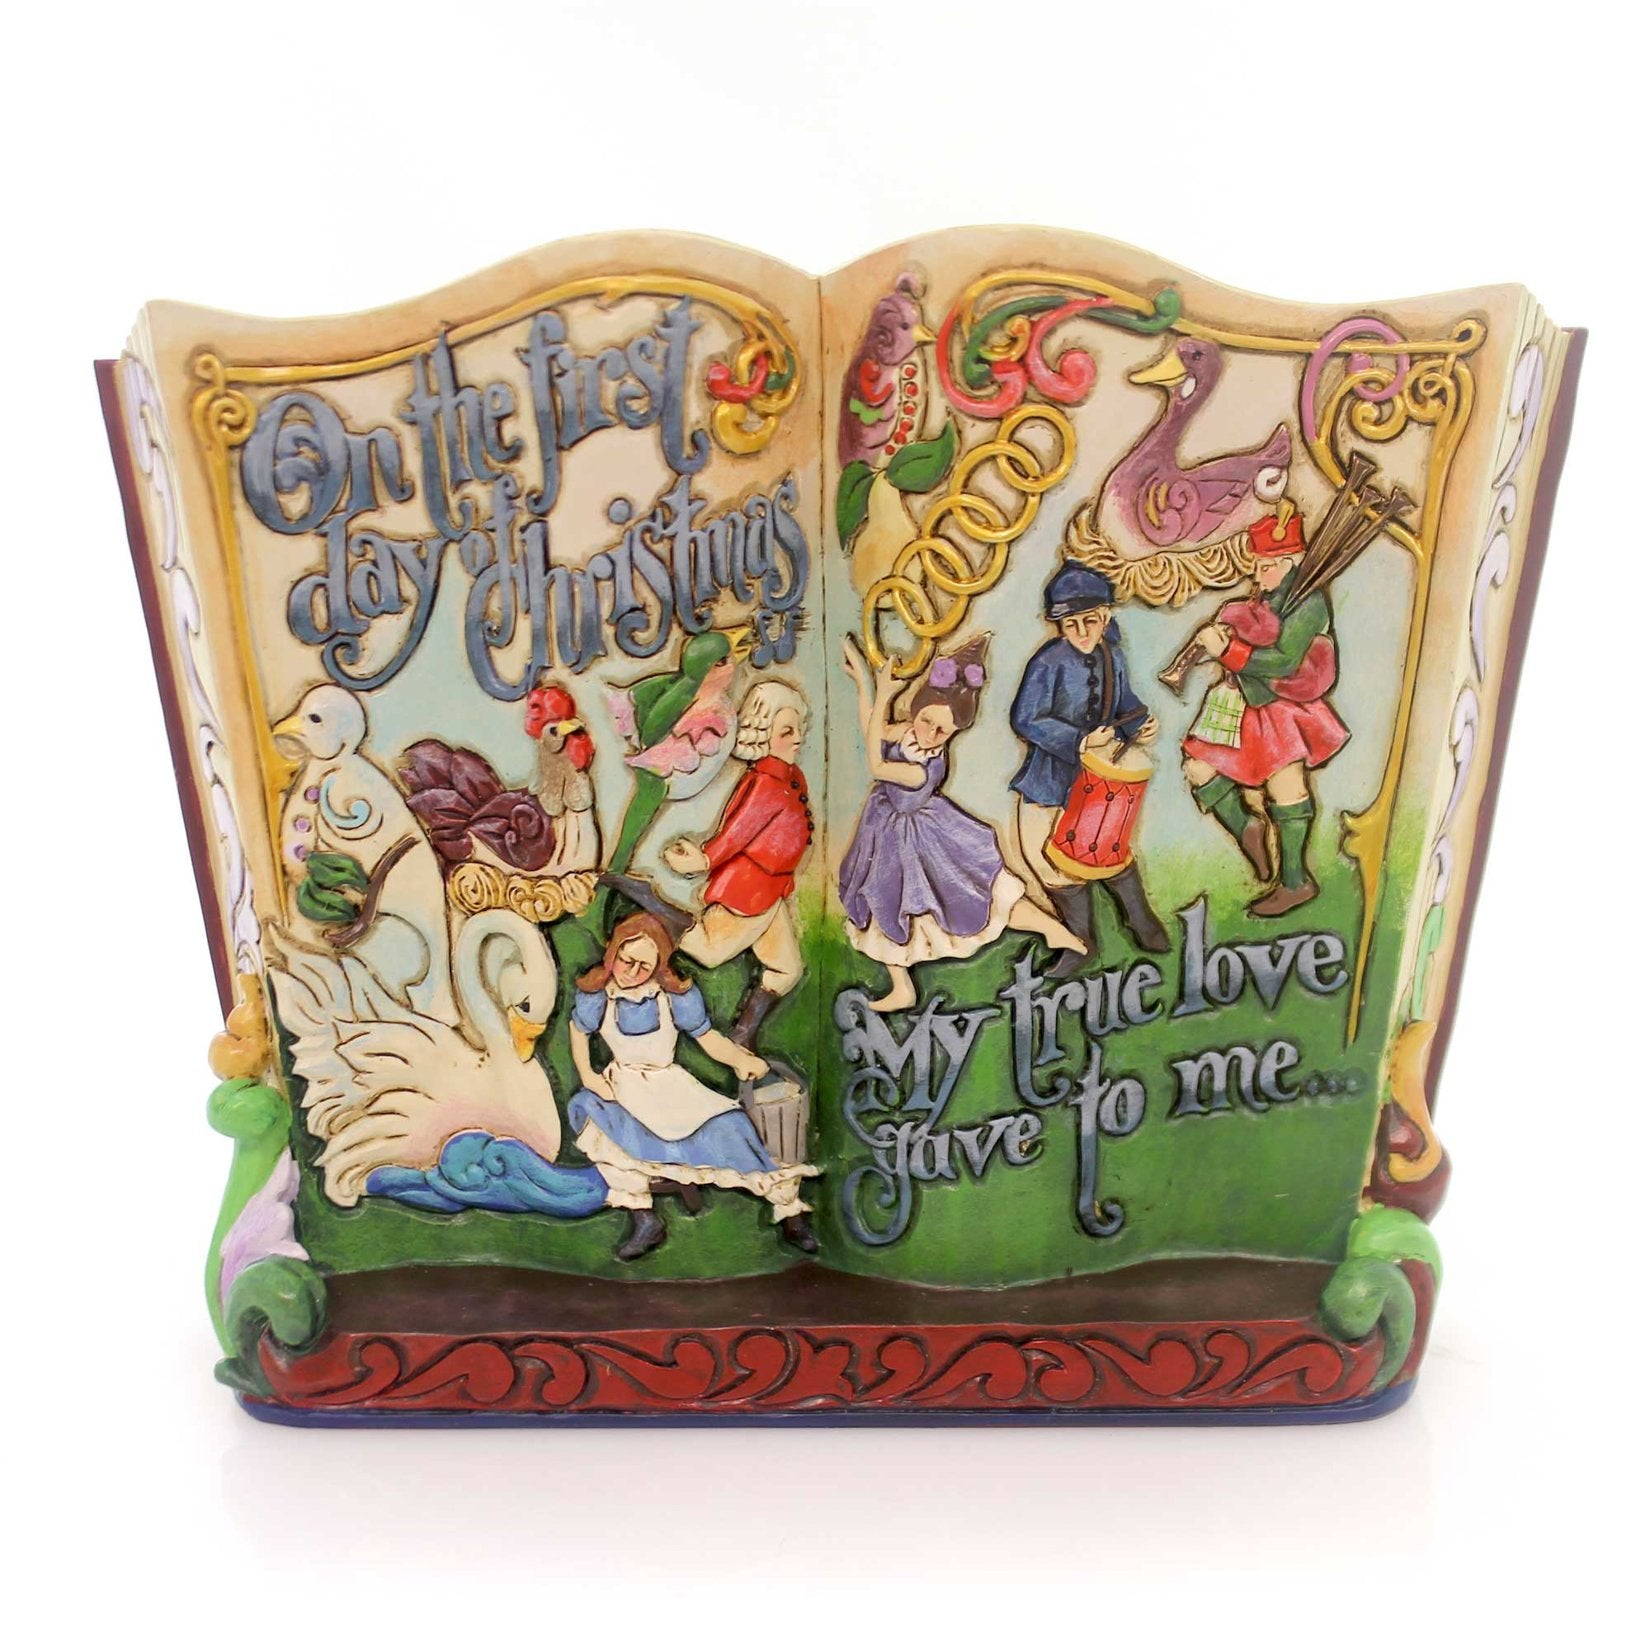 Jim Shore Golden Rings and Silly Things 12 Days Christmas Book Figurine 4053715